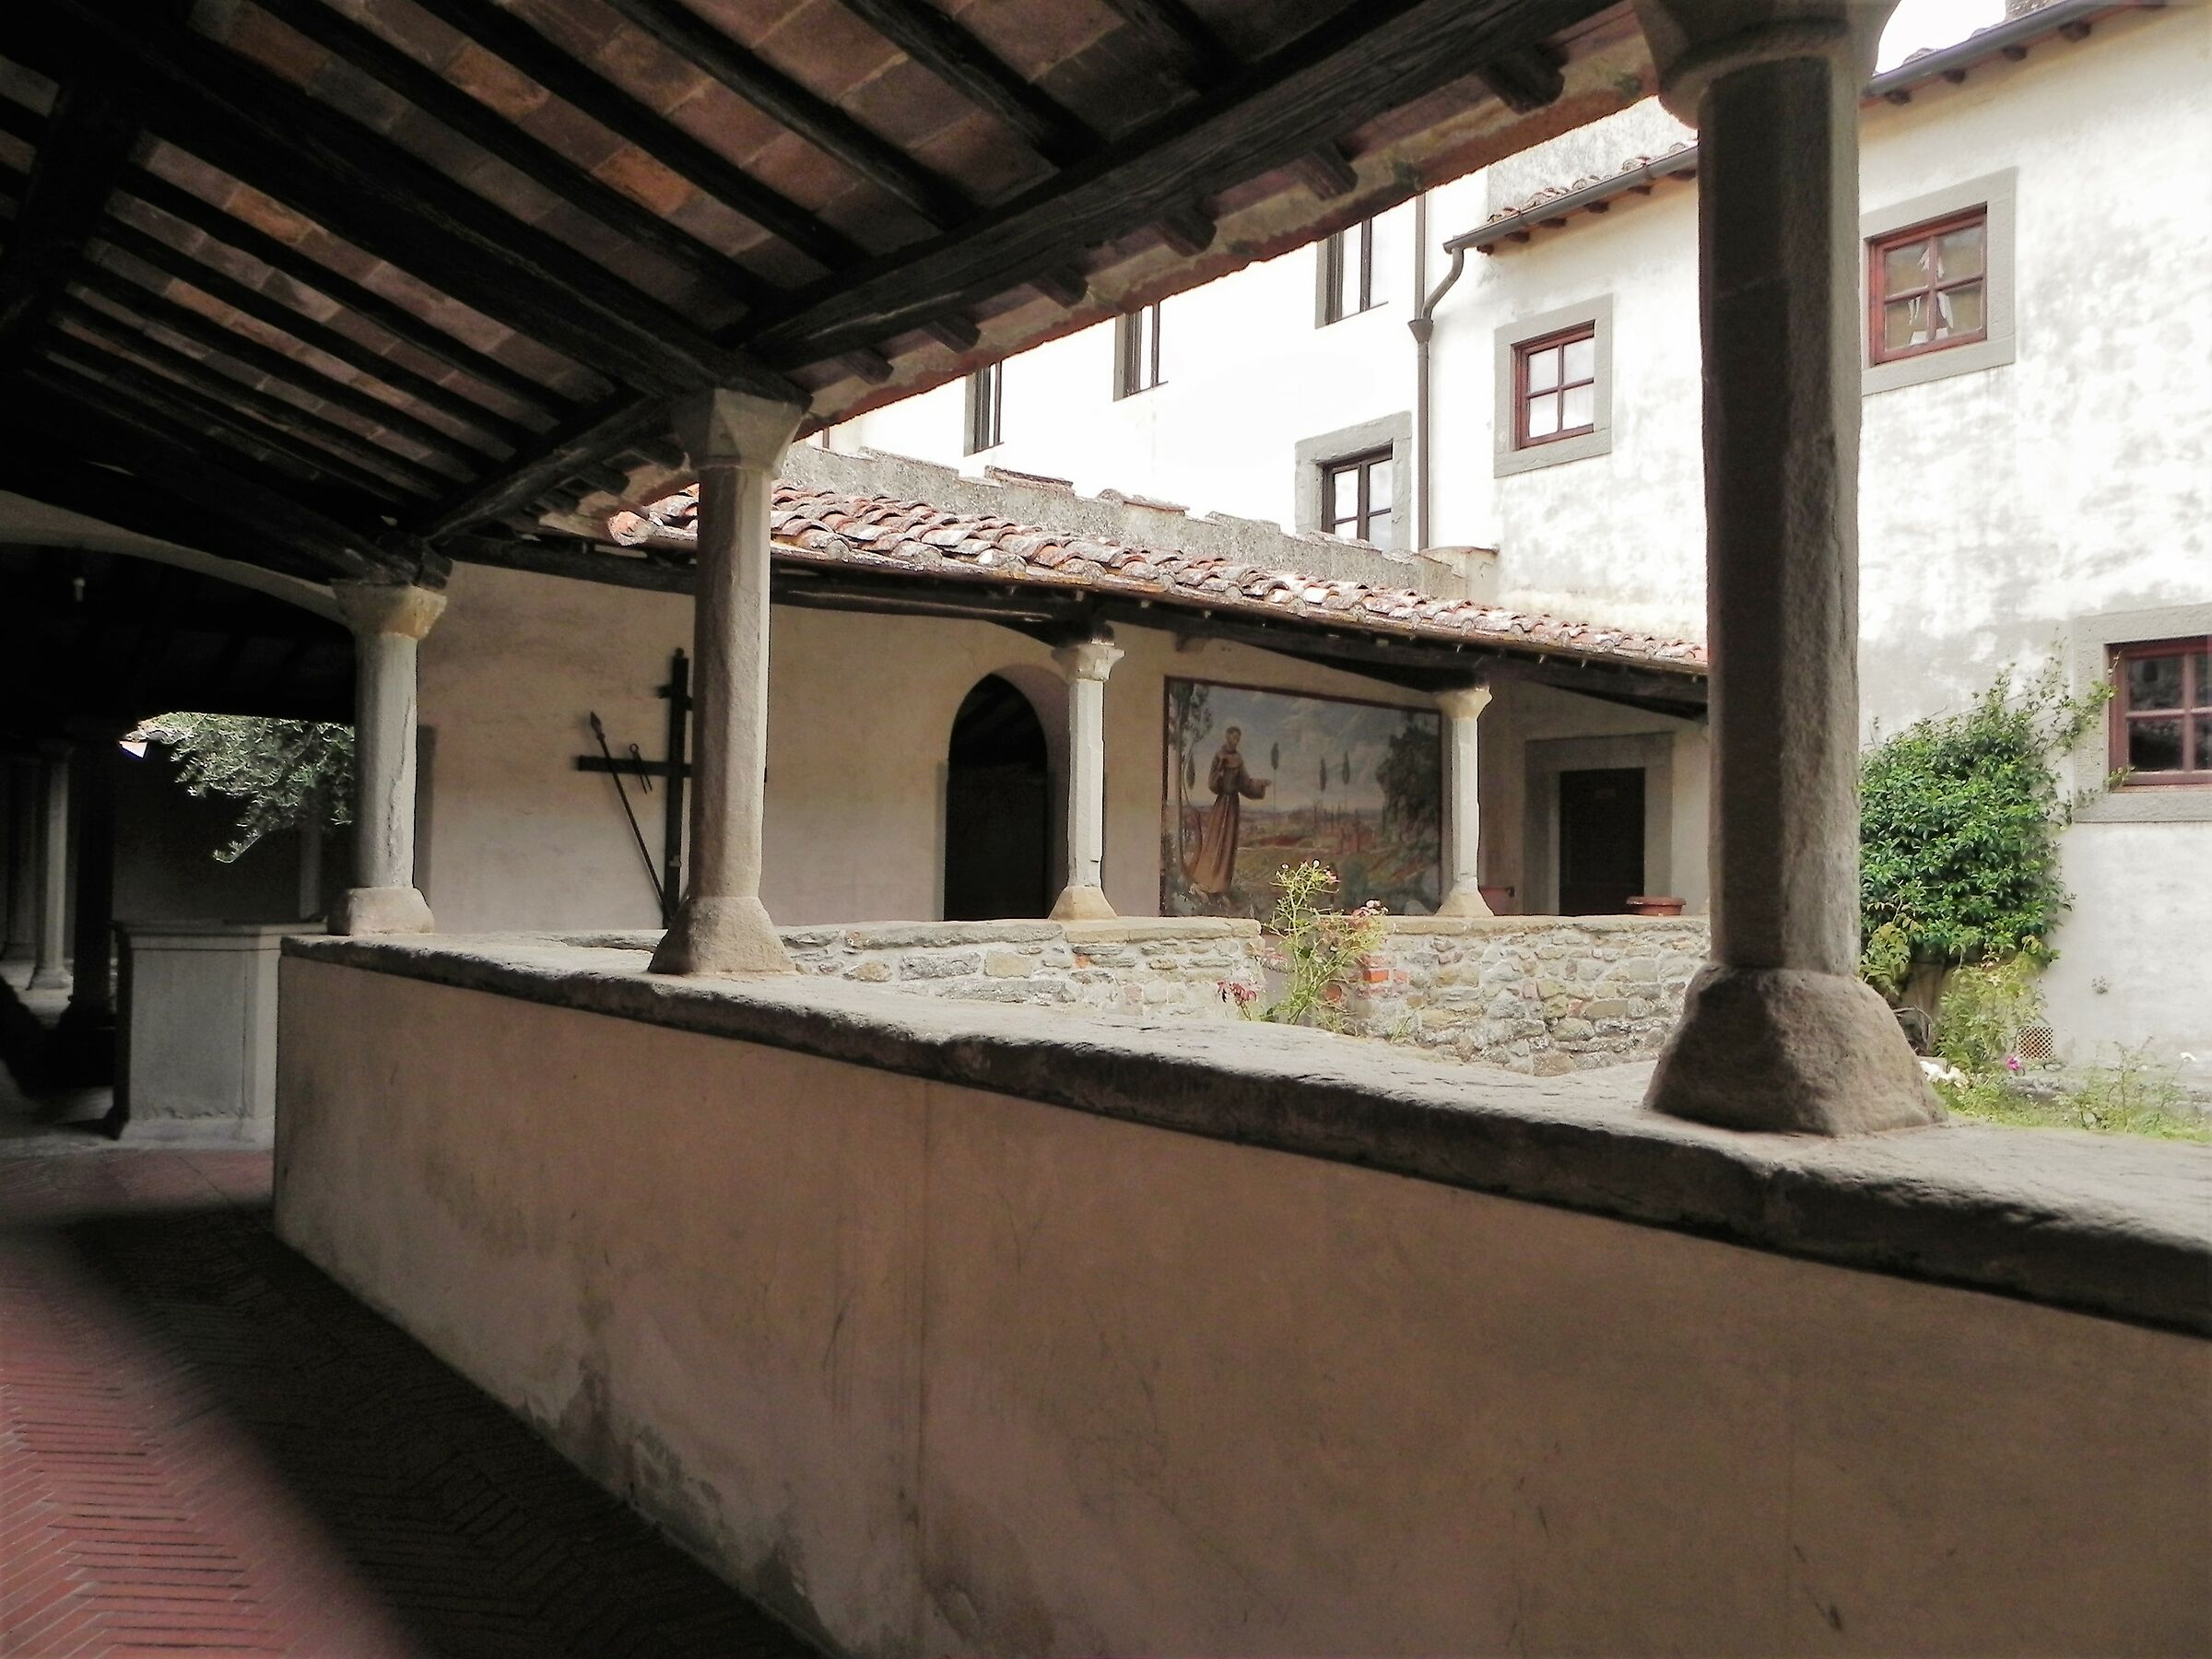 cloister of Saint Franciscan in fiesole....